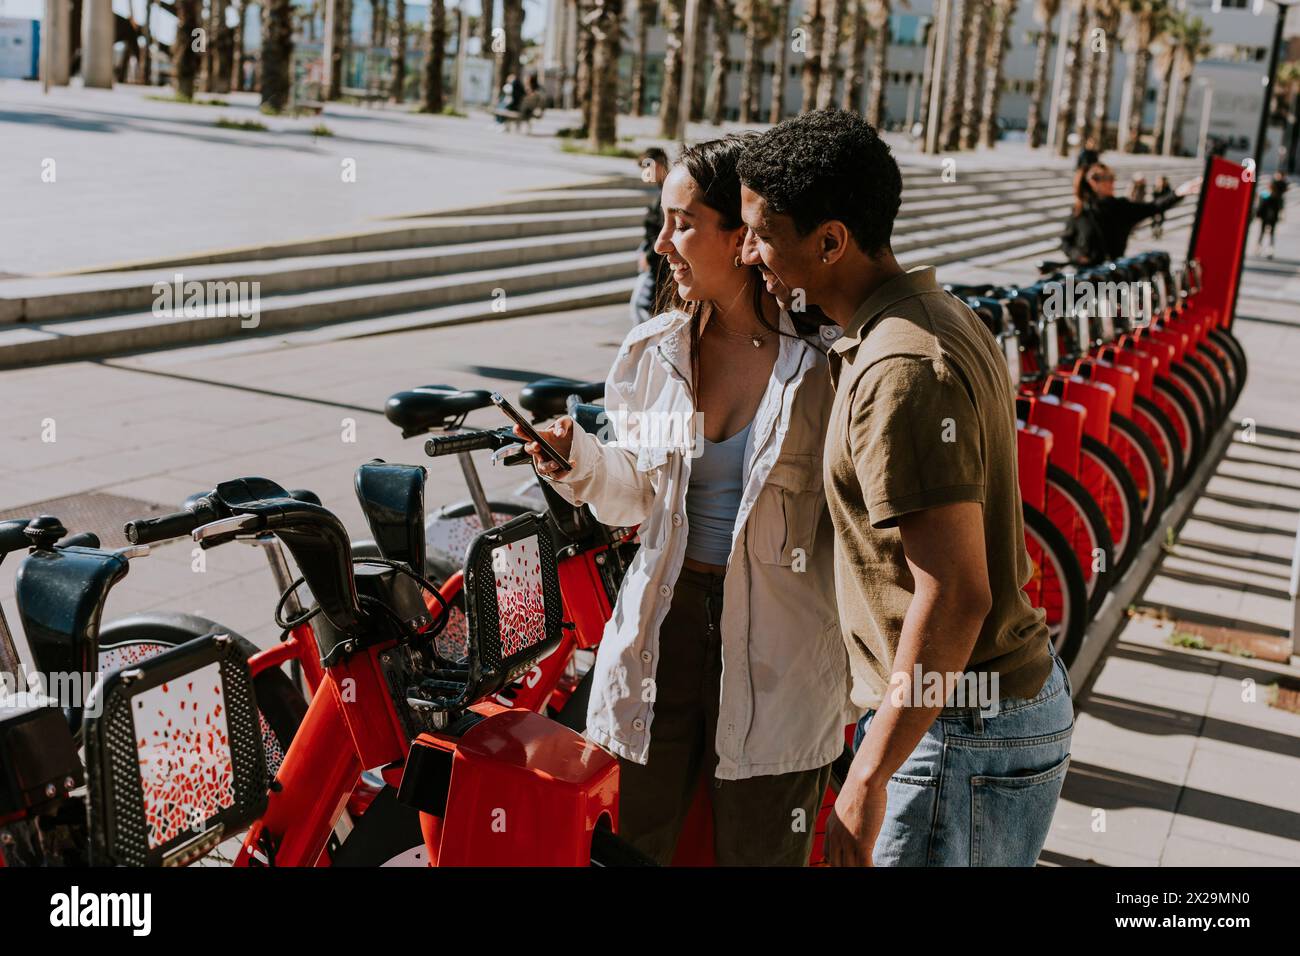 Young pair enjoying a breezy day choosing bikes from a rental station in Barcelona. Stock Photo